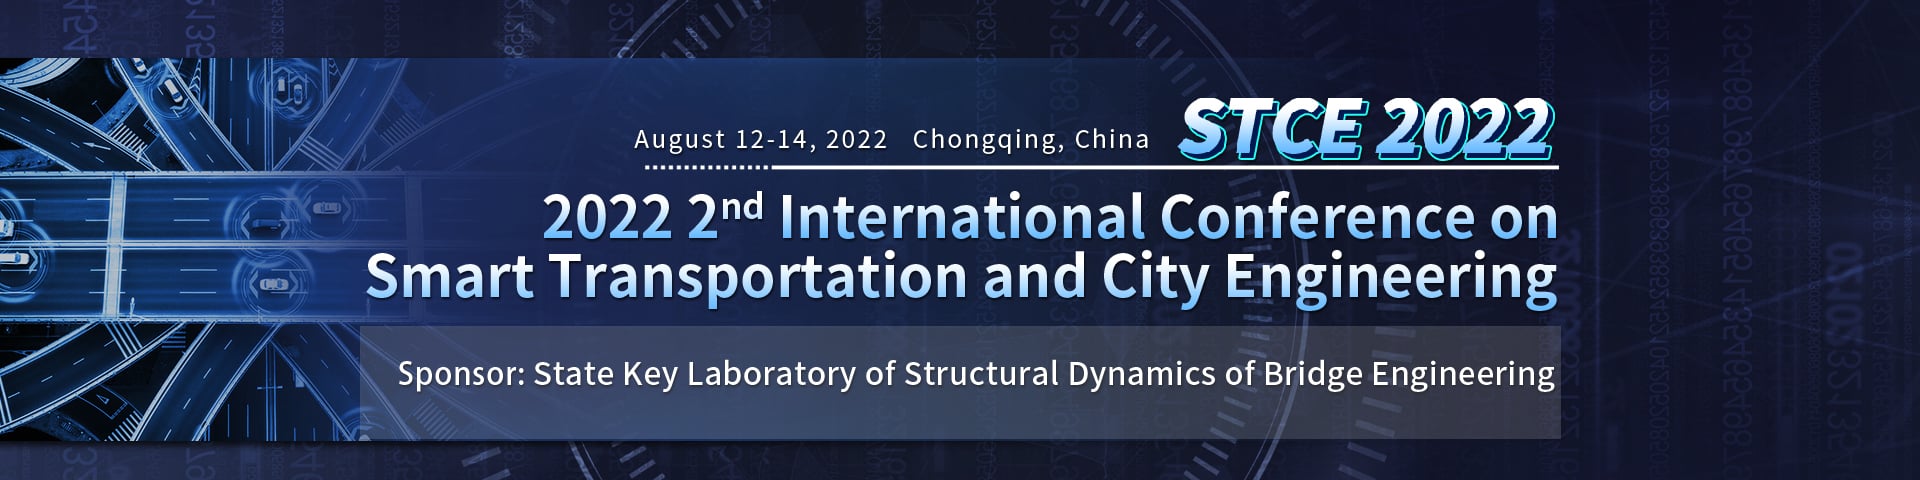 2022 2nd International Conference on Smart Transportation and City Engineering (STCE 2022)